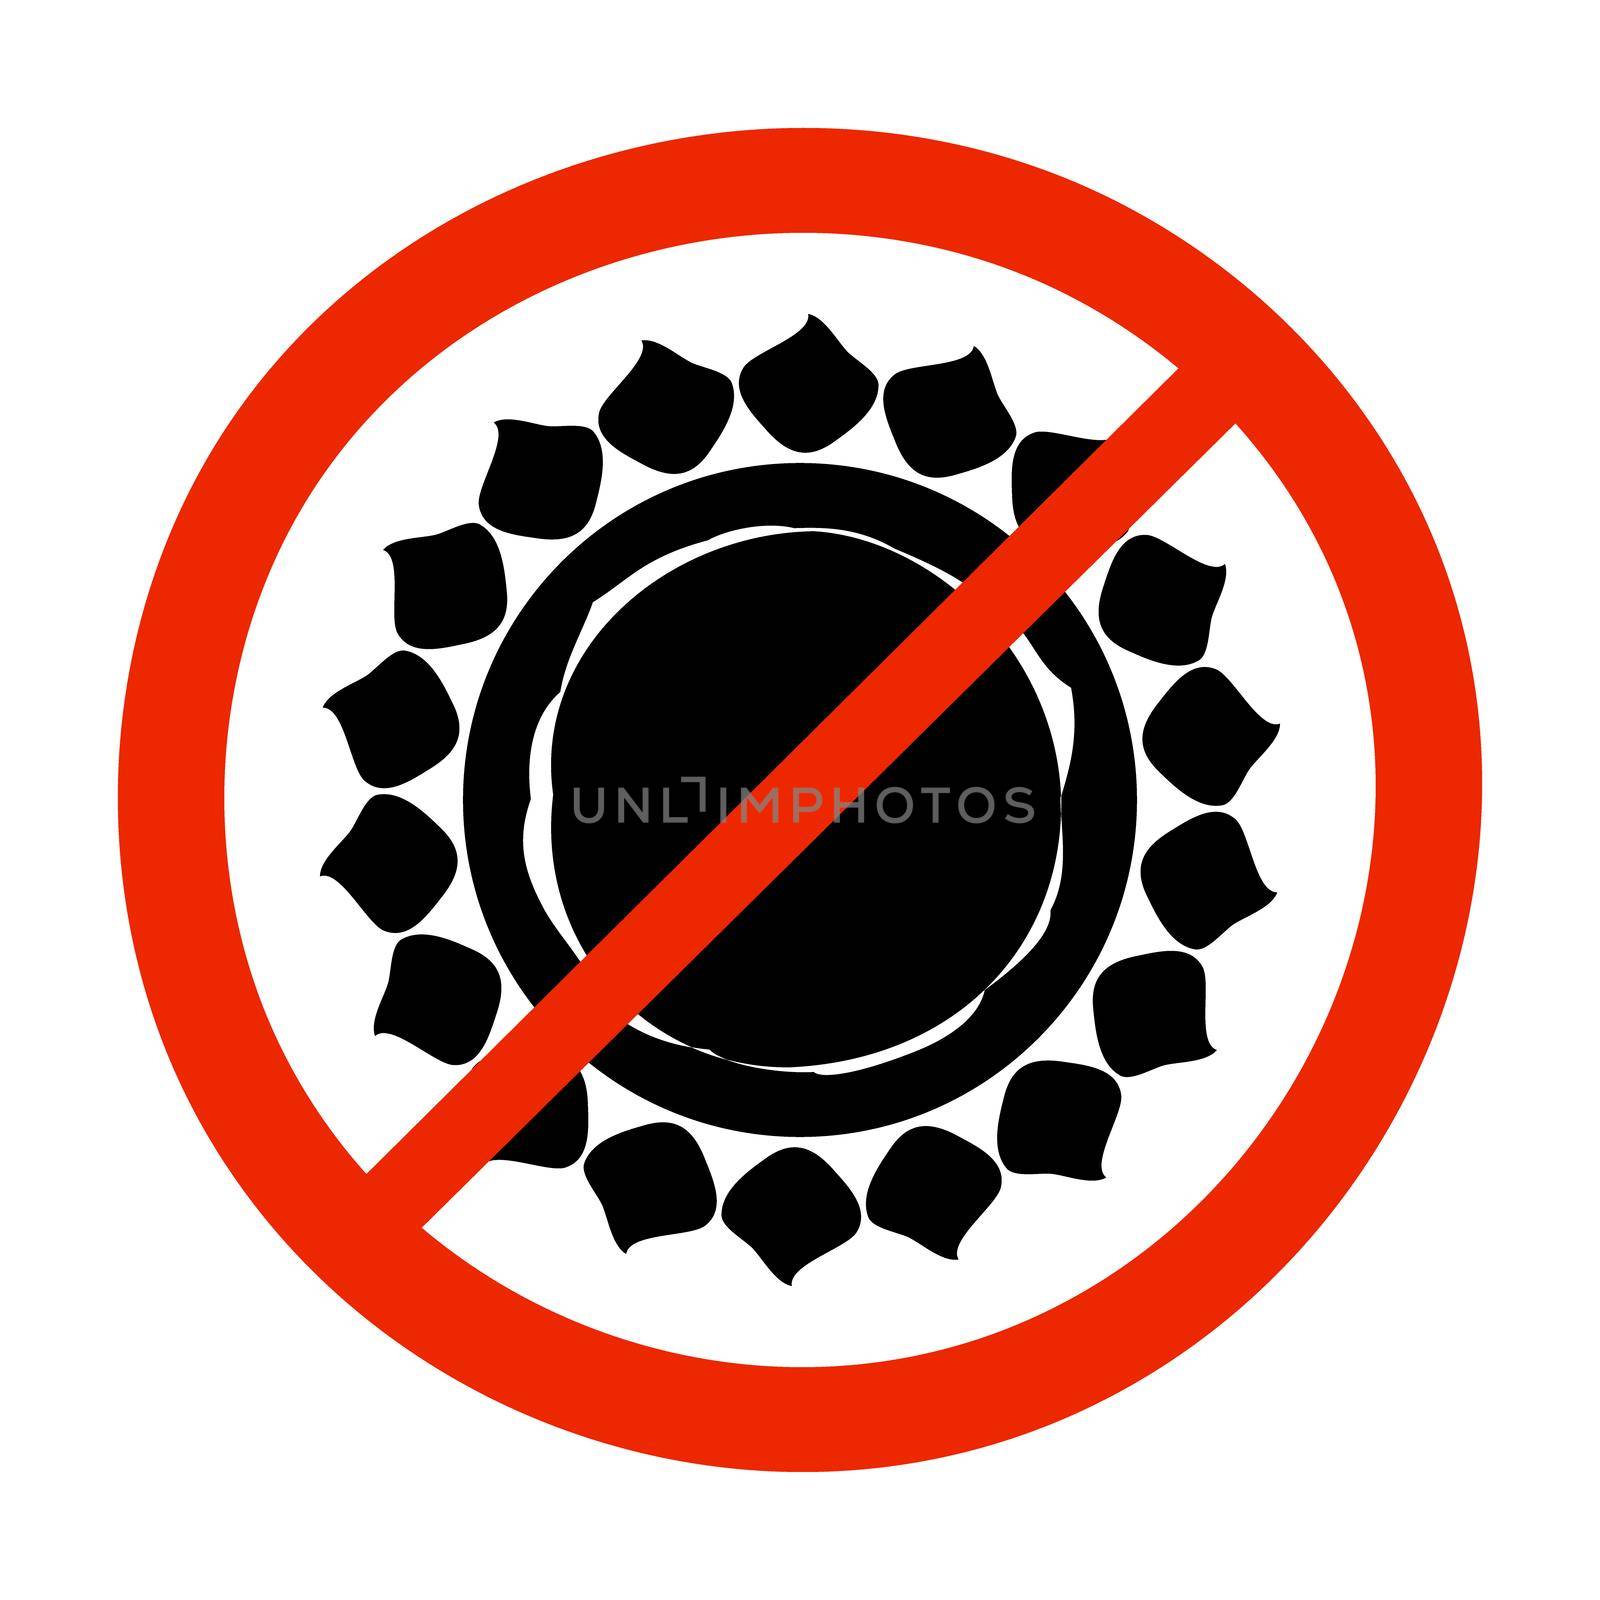 Stop or ban red round icon with sun. Protect from the sun's rays. Sunscreen protection concept. Keep away direct from sunshine. Stock vector illustration